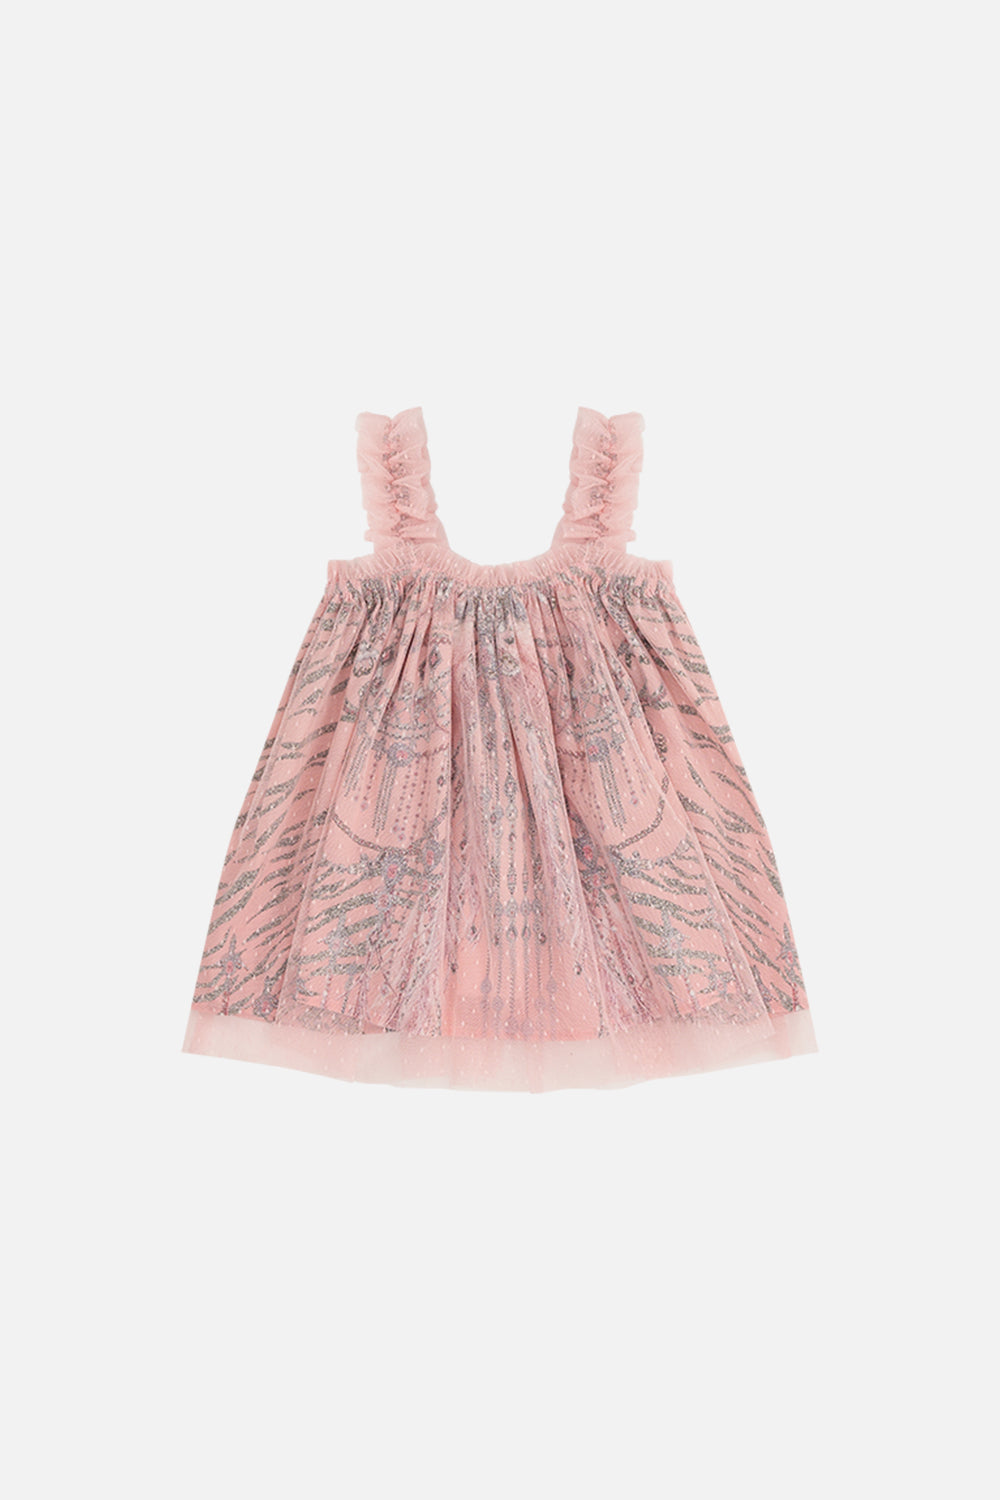 Babies Ruffle Tent Dress With Tulle Layer Starship Sistas print by CAMILLA